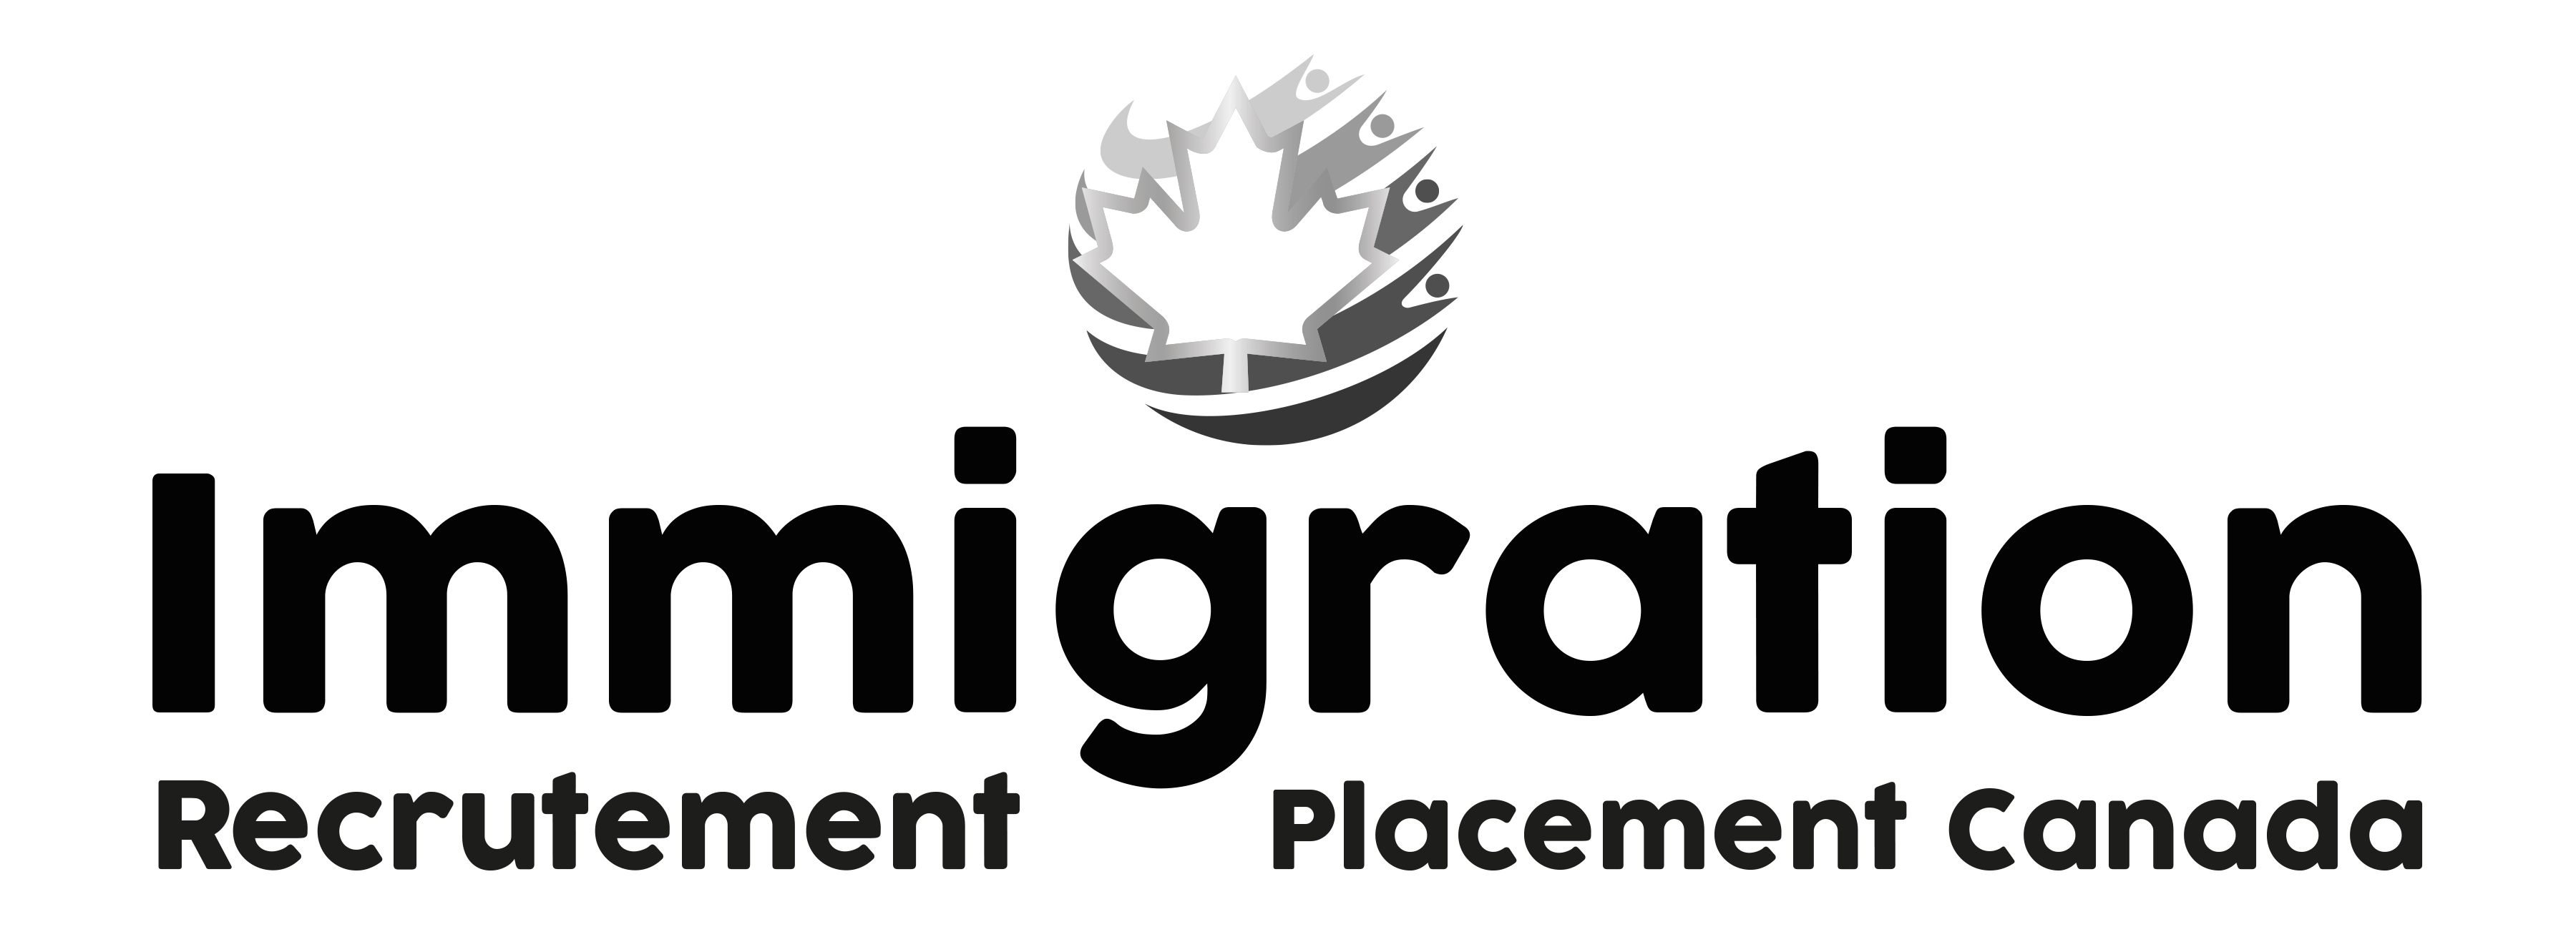 Immigration Recrutement Placement Canada inc